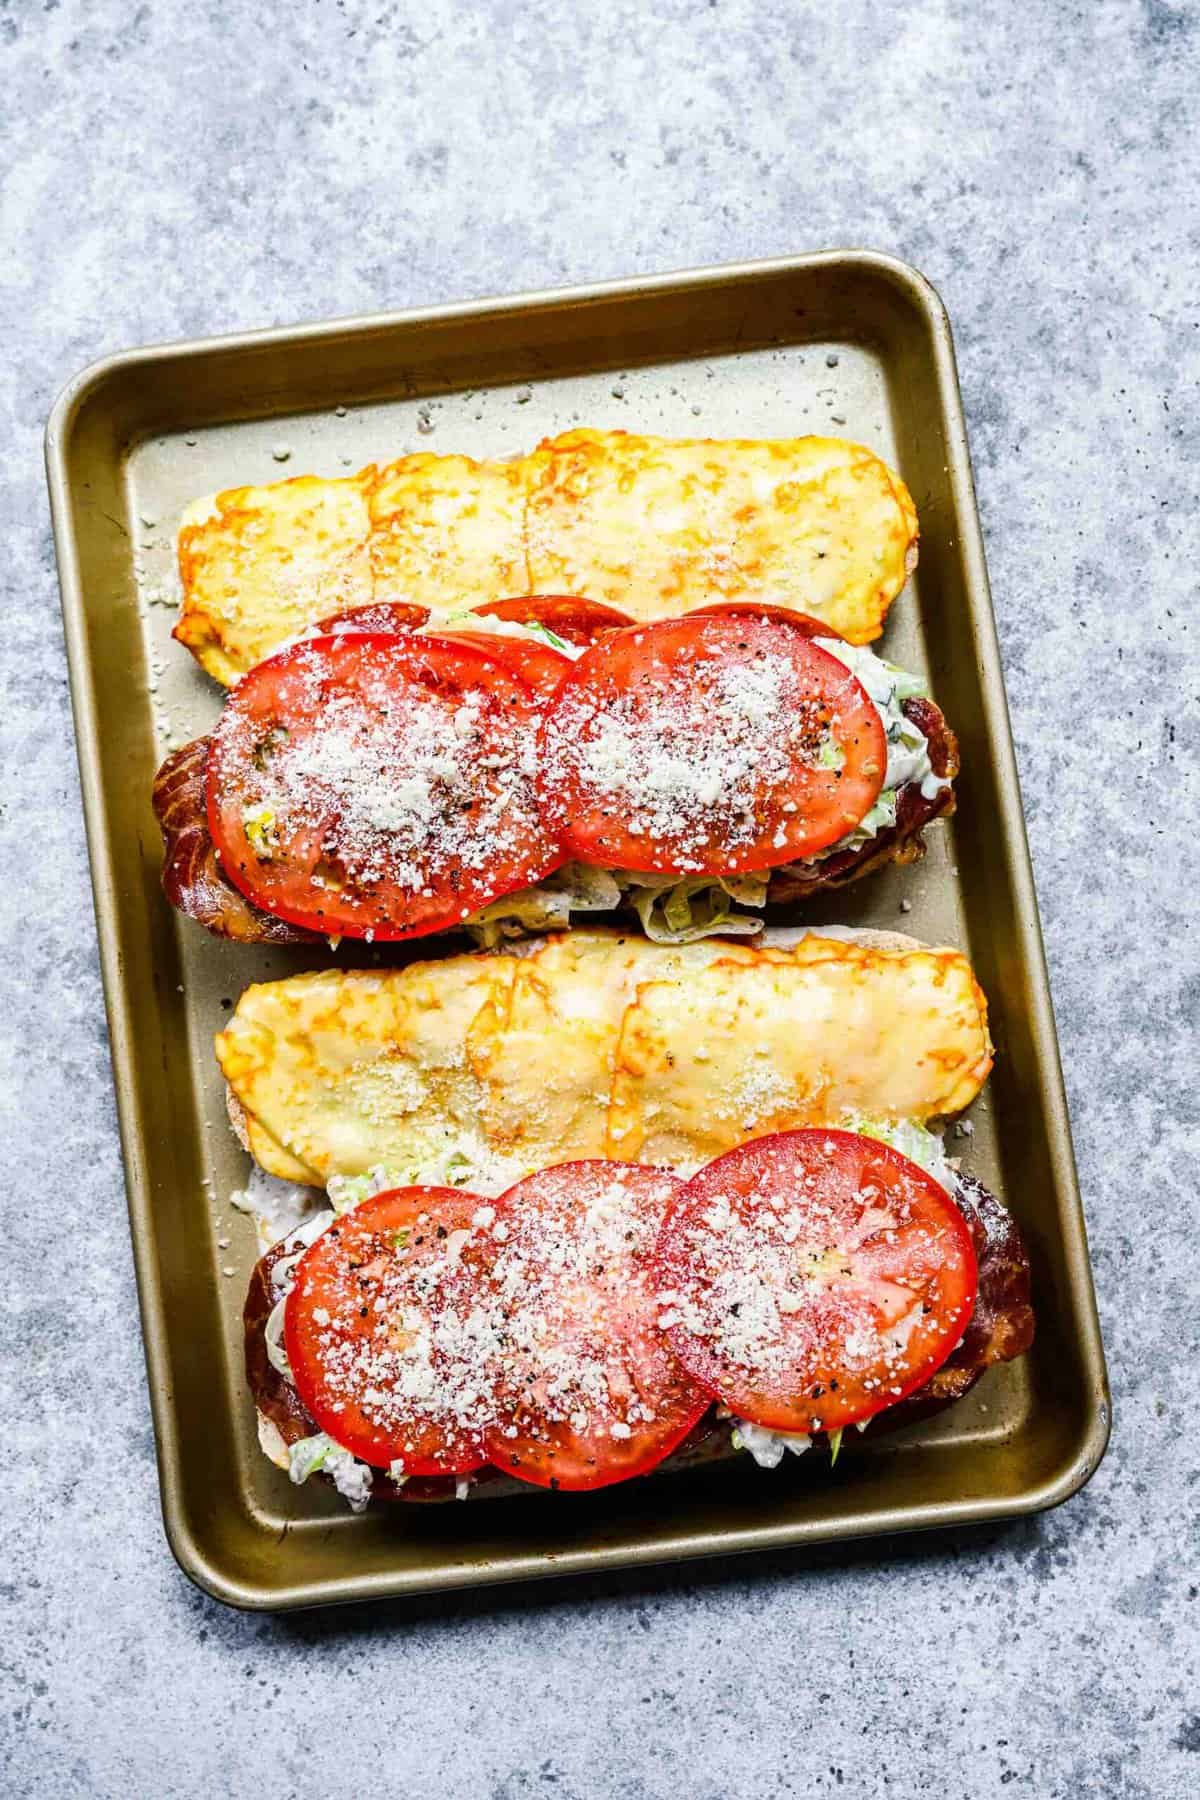 Two hoagie loaves on a baking sheet, with melted cheese on one half, and cured meats, topped with a salad, topped with slices of tomato with salt, pepper, and parmesan on top on the other half